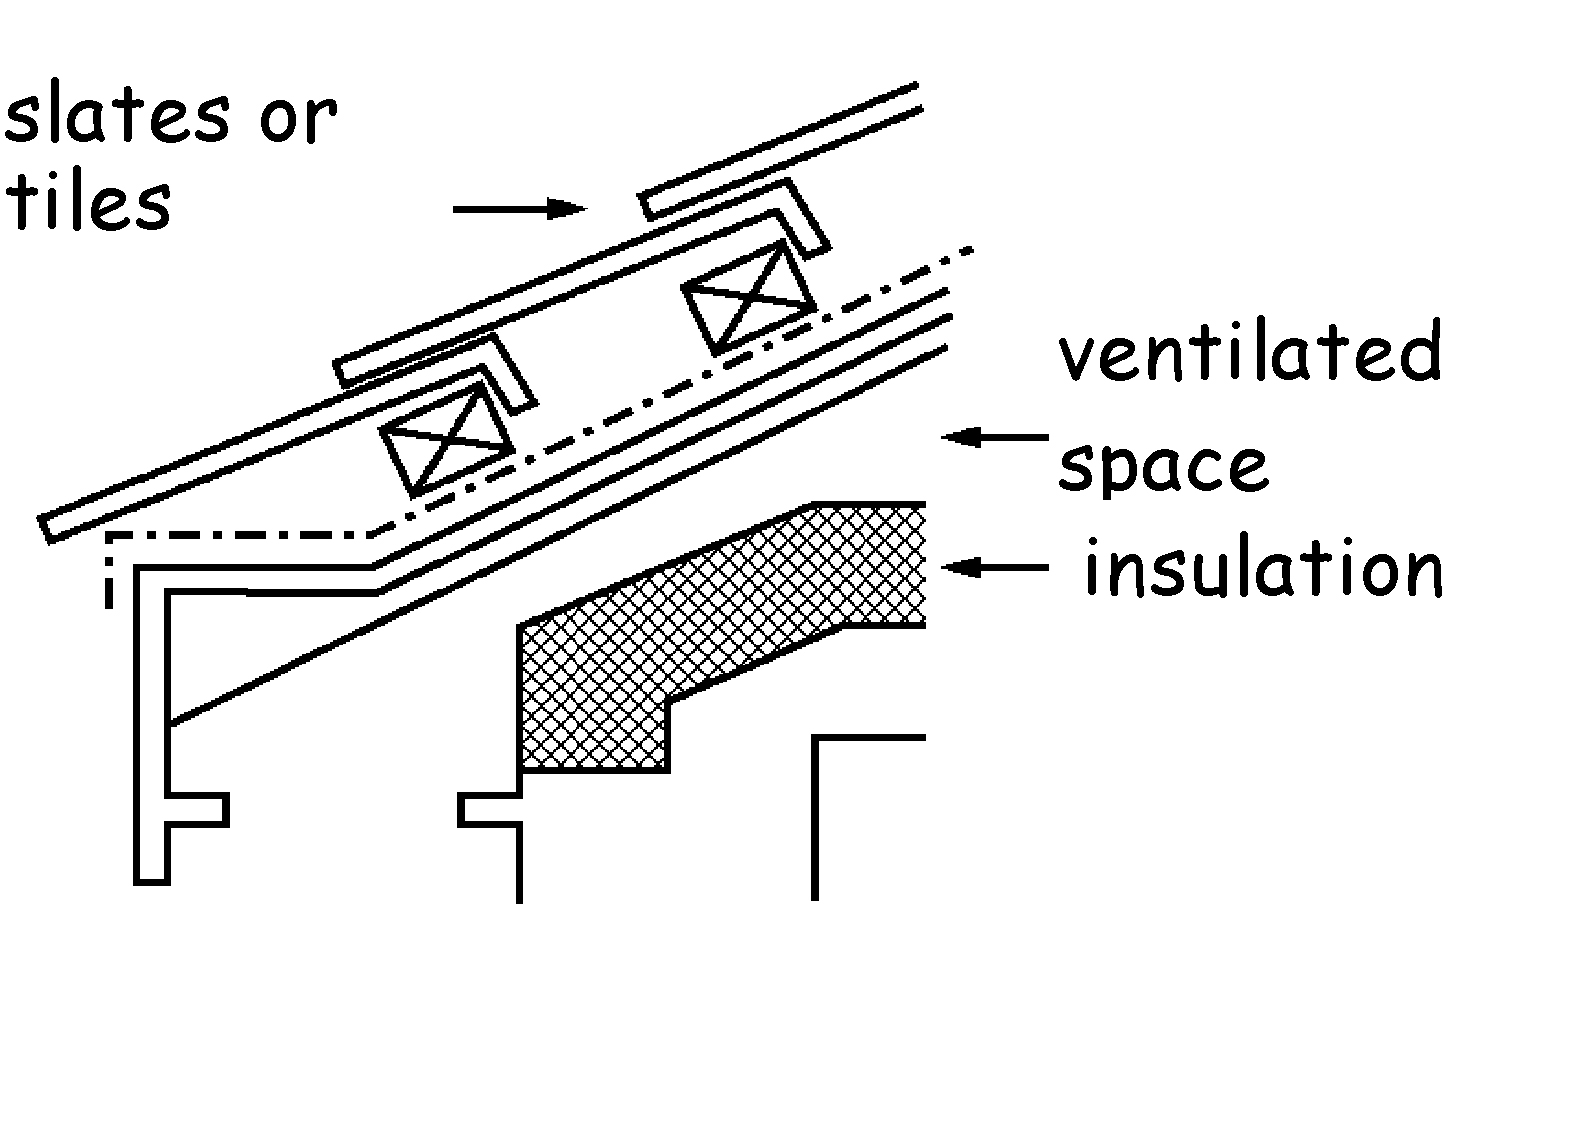 Roof type A insulation on a level ceiling